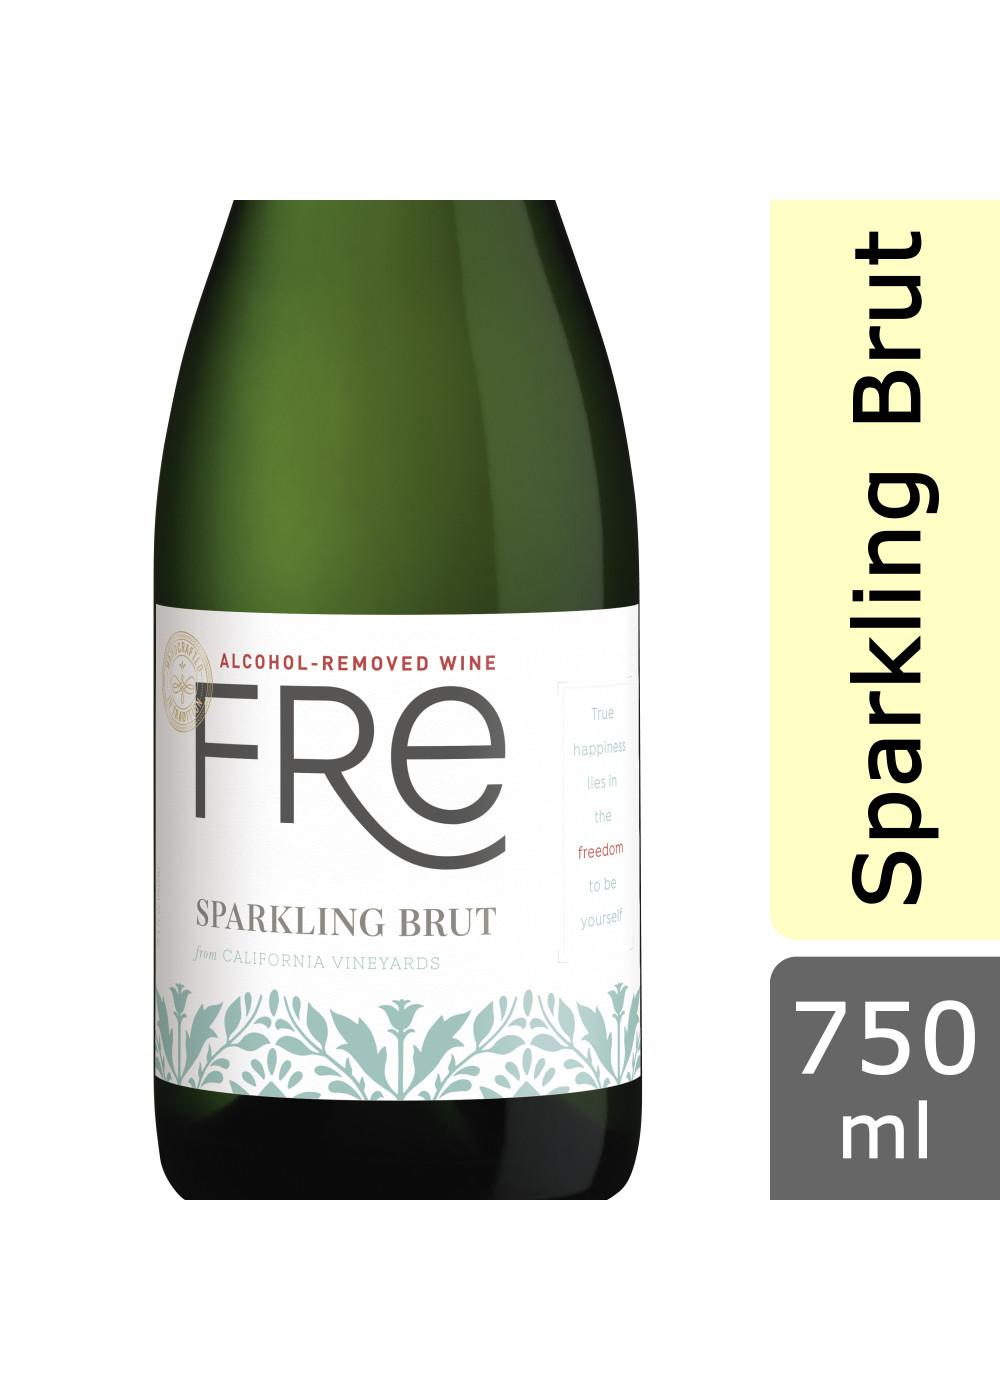 Sutter Home Family Vineyards Fre Alcohol Removed Sparkling Brut; image 4 of 5